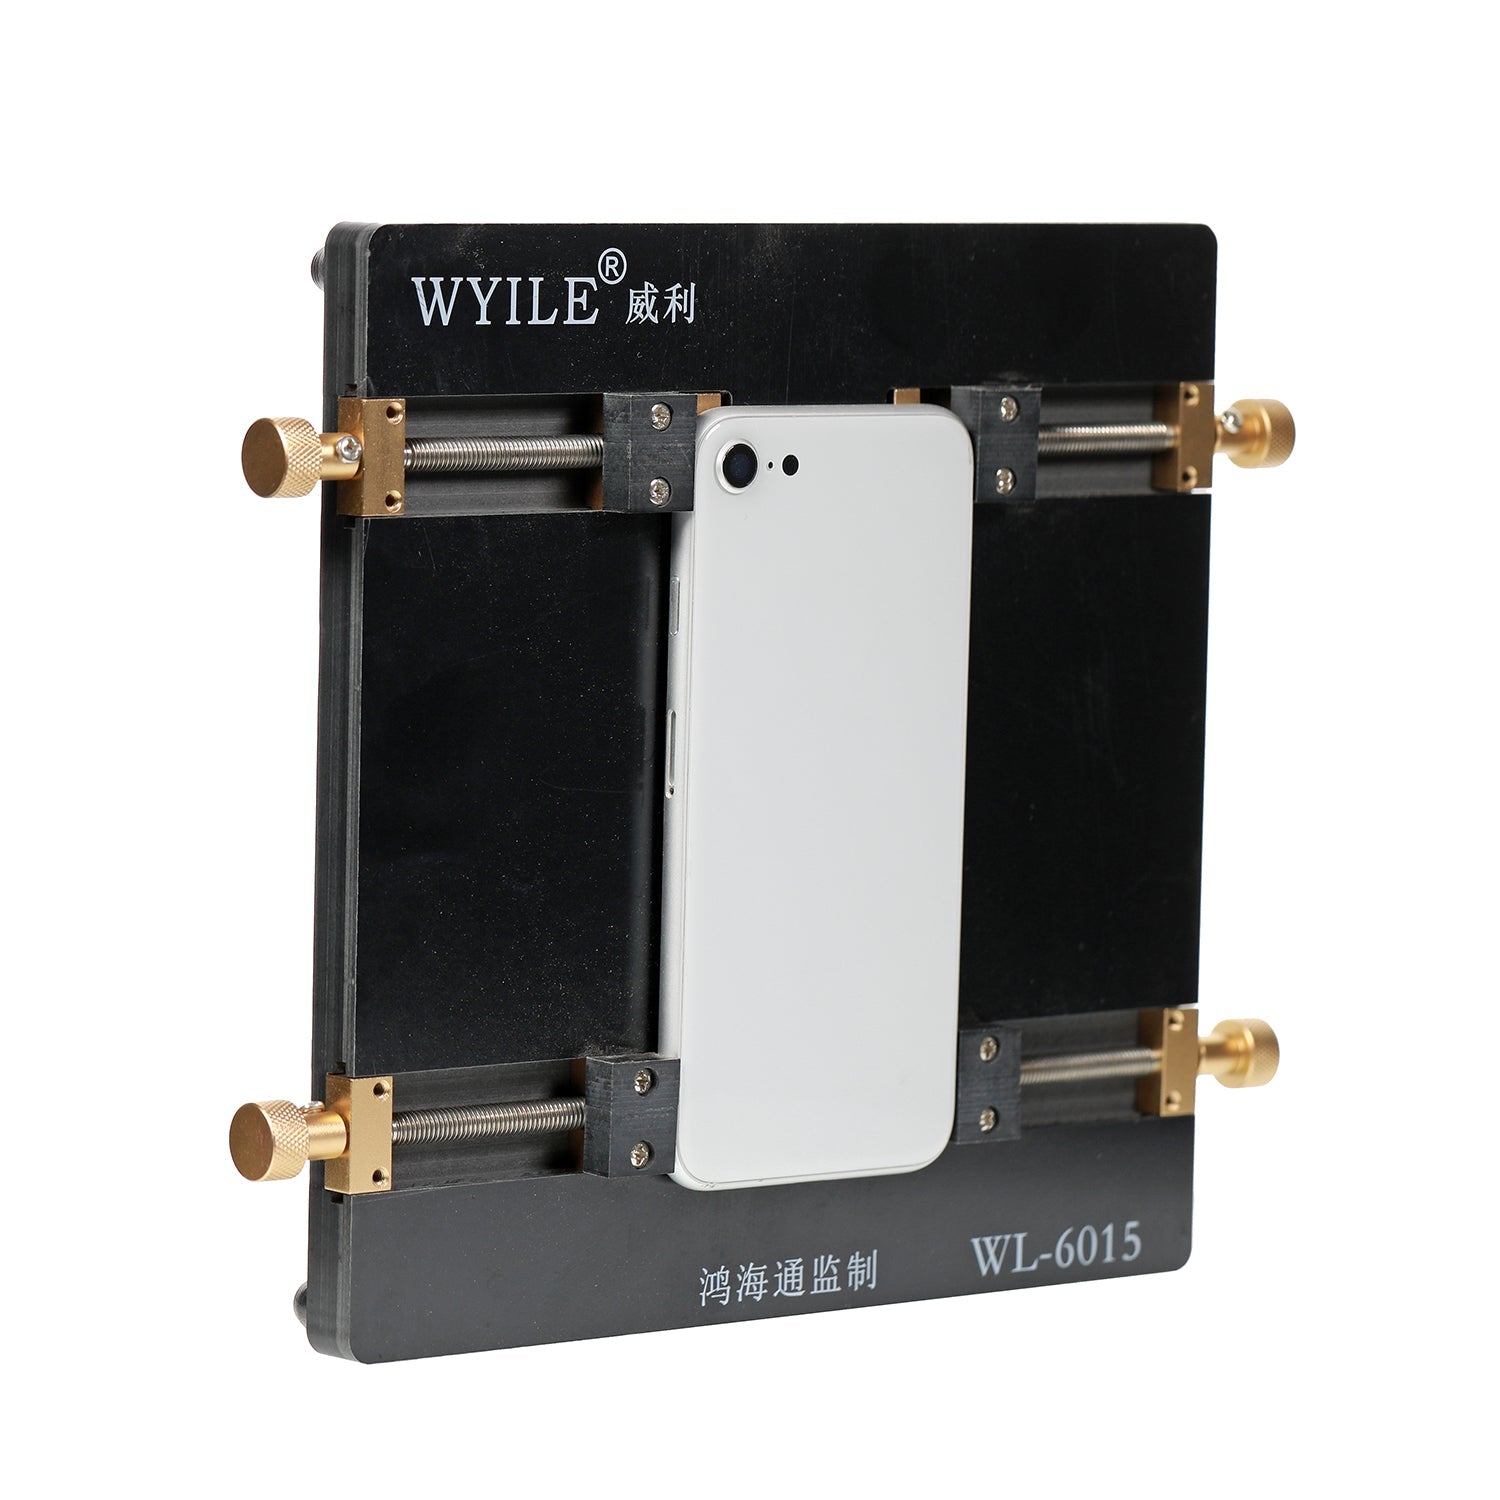 WYLIE WL-6015 BACK COVER GLASS FIXTURE